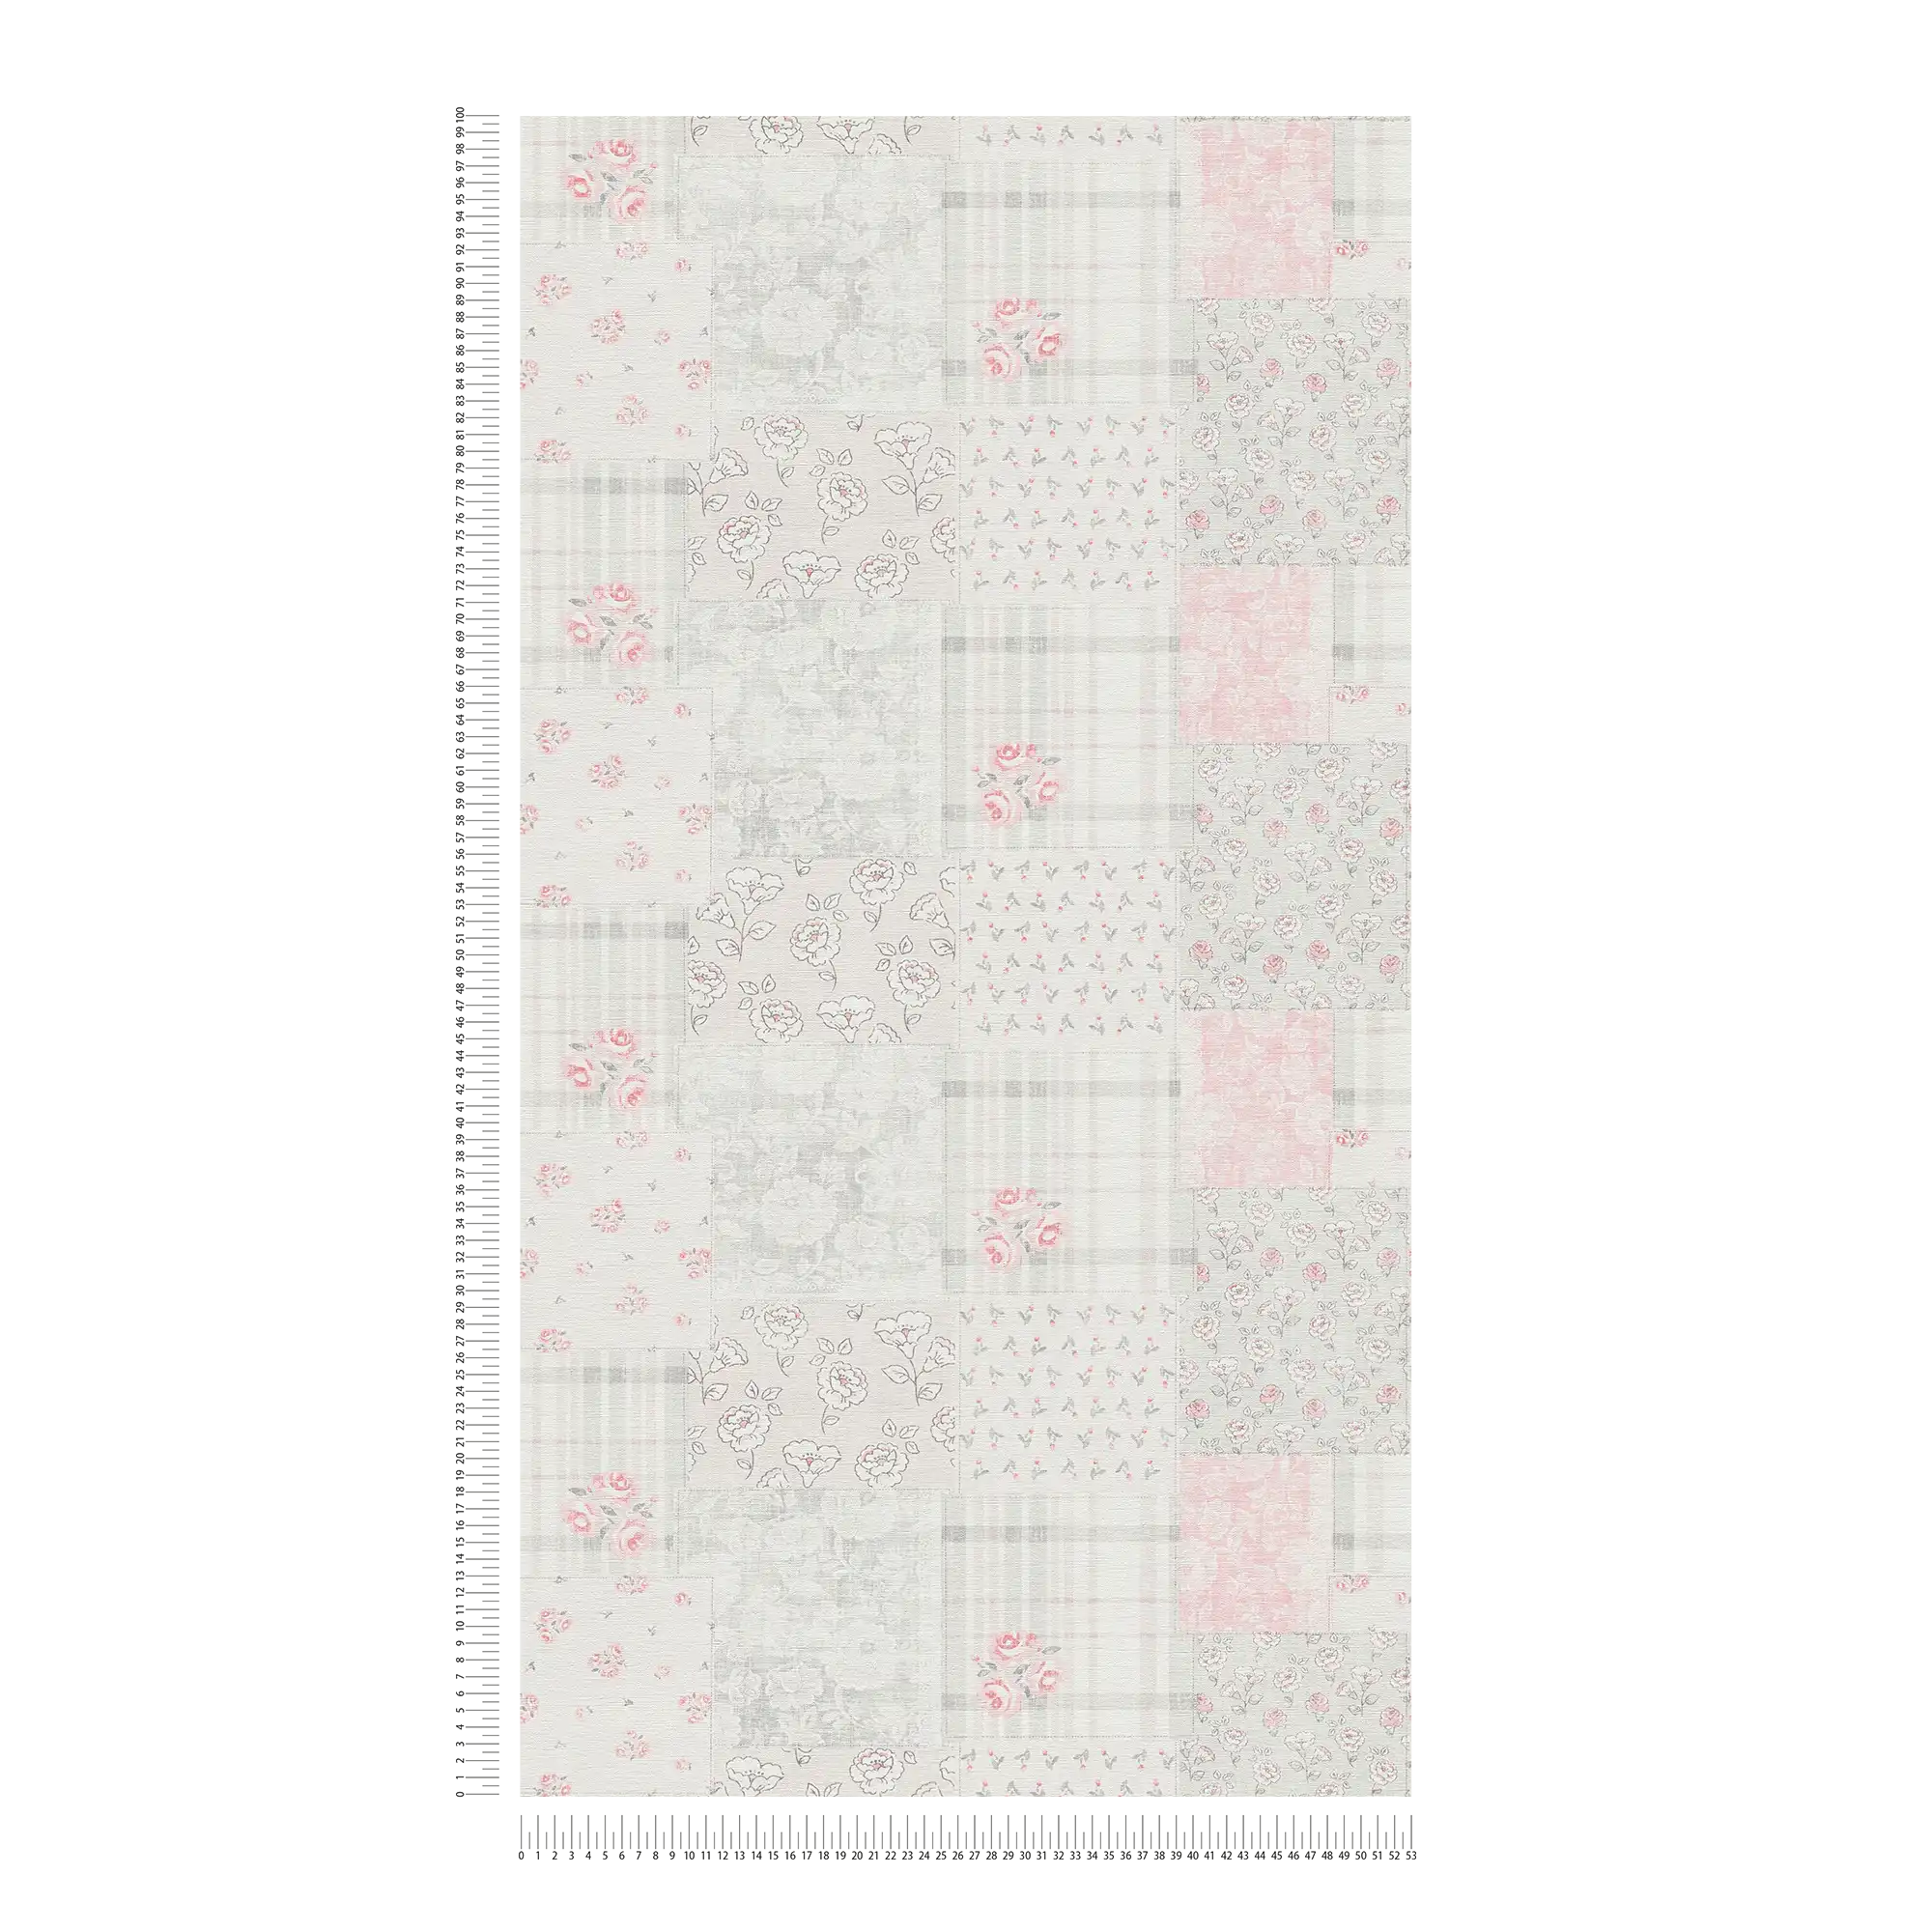             Wallpaper country house floral and chequered pattern - grey, red, white
        